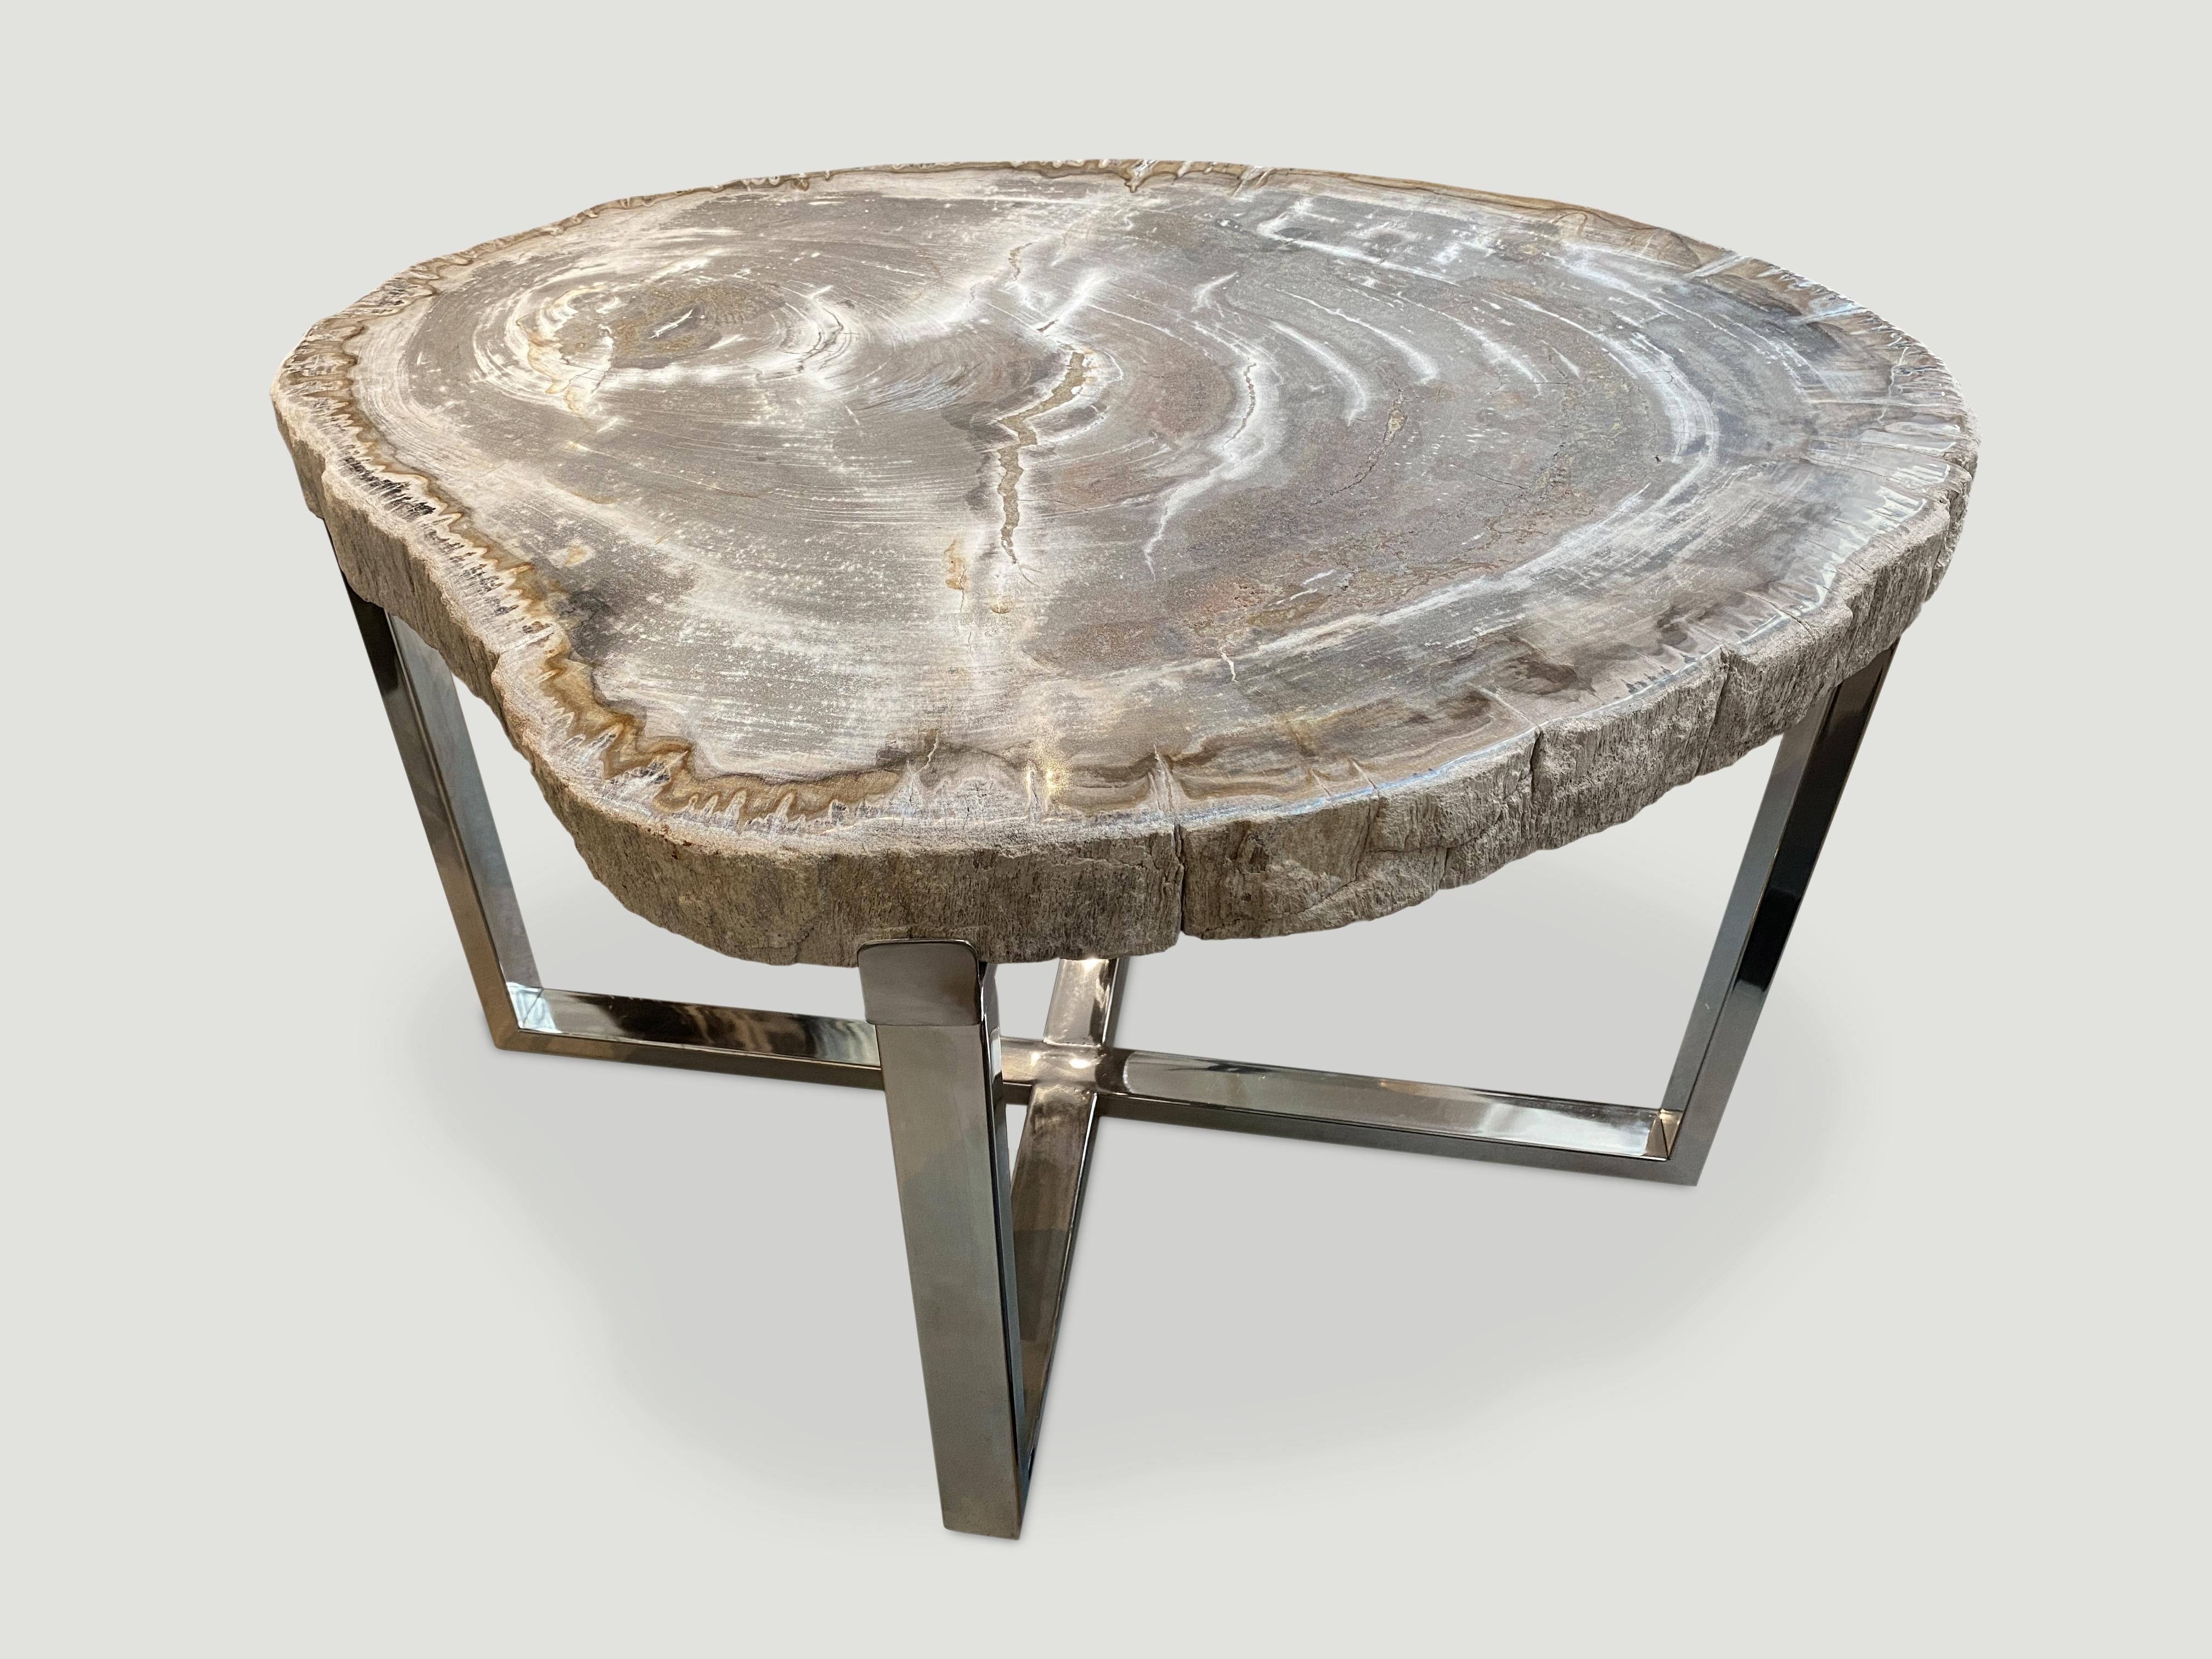 Andrianna Shamaris High Quality Petrified Wood Slab Top Side Table In Excellent Condition For Sale In New York, NY